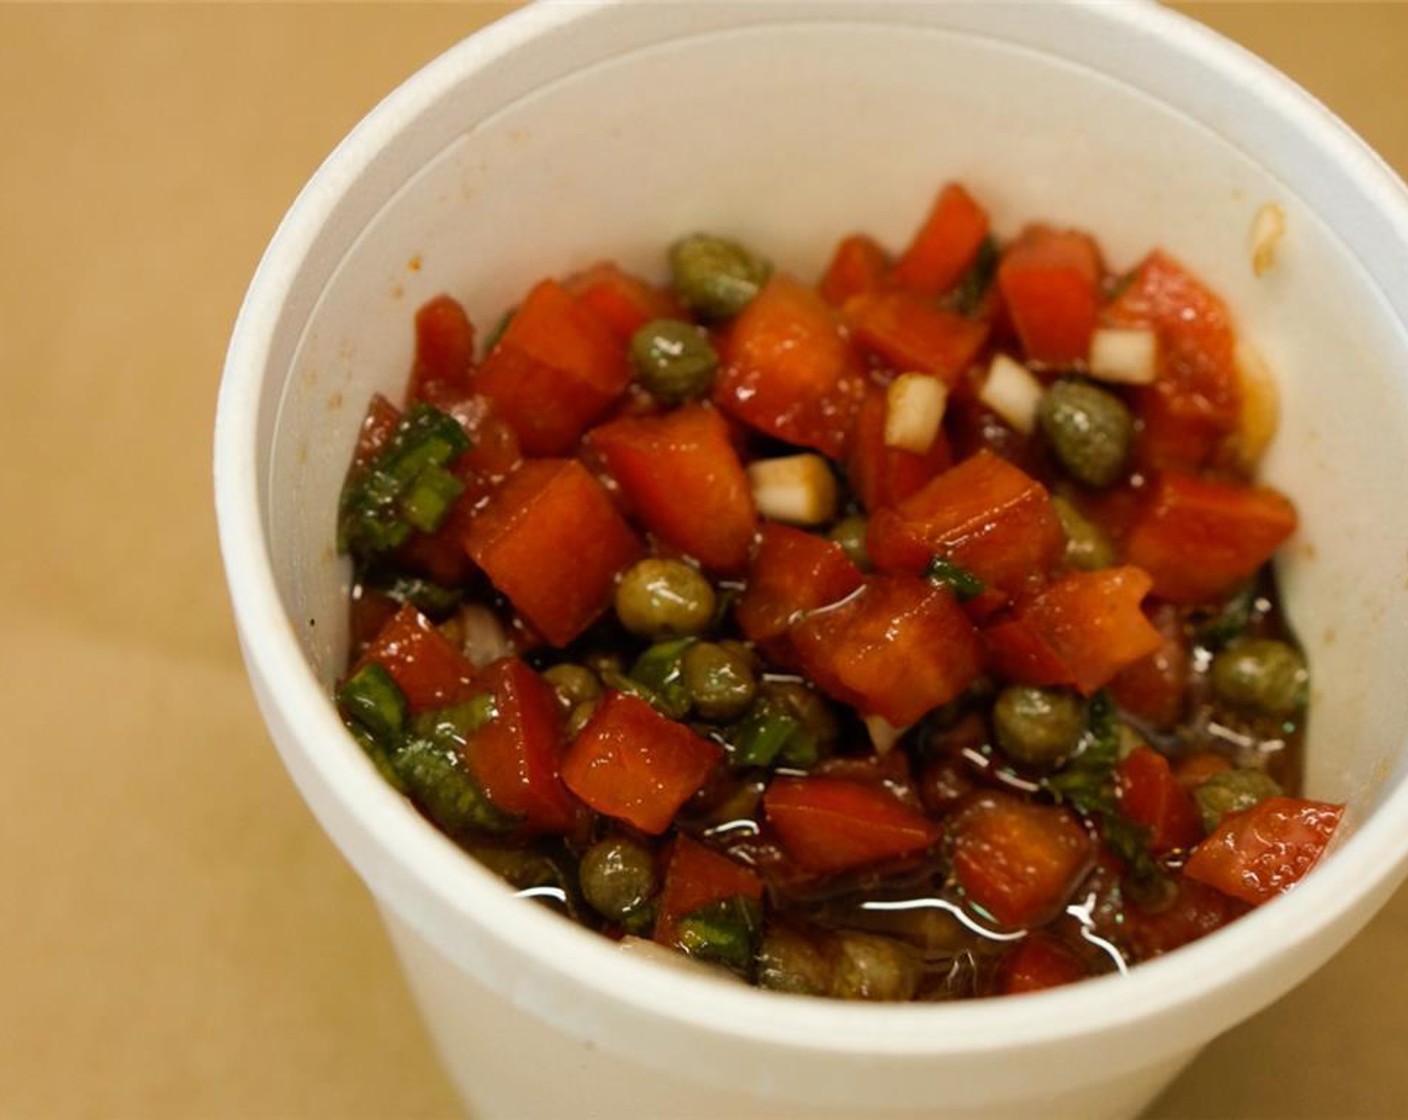 step 2 To make the salsa, combine the tomatoes (1/2 cup), red onion (1/8 cup), Capers (2 Tbsp), chives (1 tsp), Balsamic Vinegar (1/4 cup), and a little of the Salt (1 pinch) and Ground White Pepper (1 pinch).  Refrigerate.